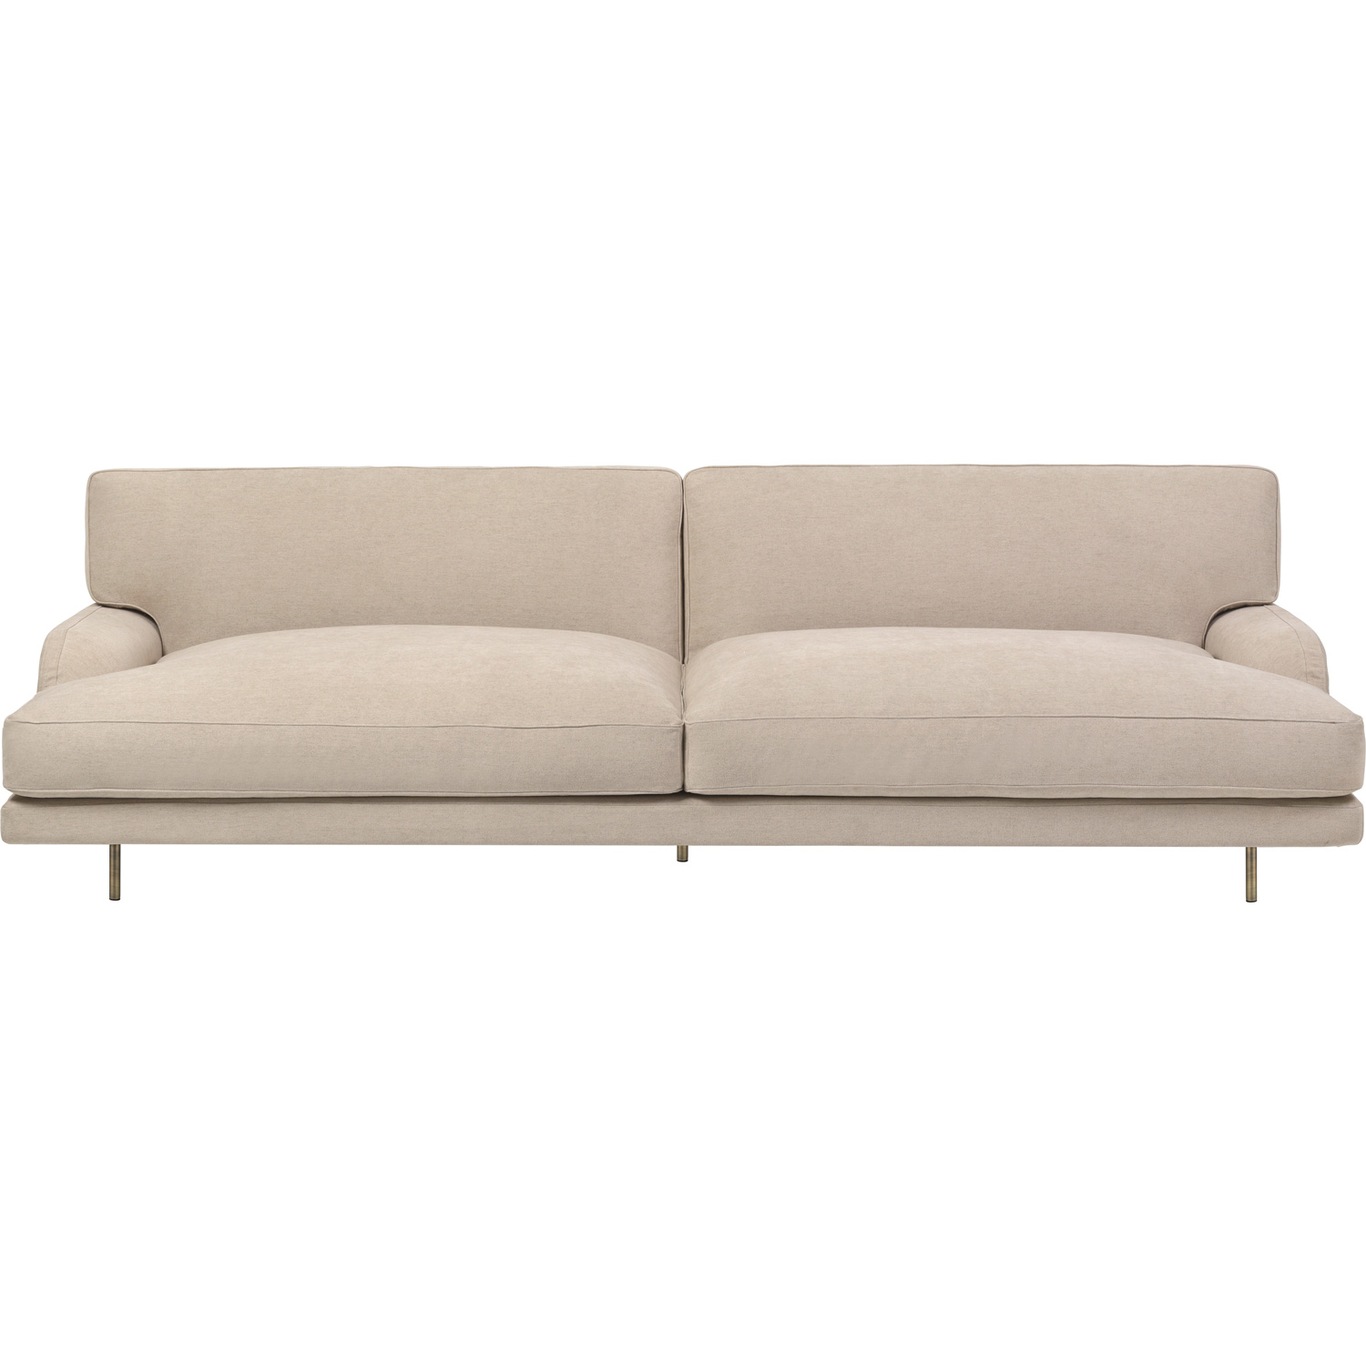 Flaneur Sofa FC 2-Pers, Ben Messing / Hot Madison 073 Beige